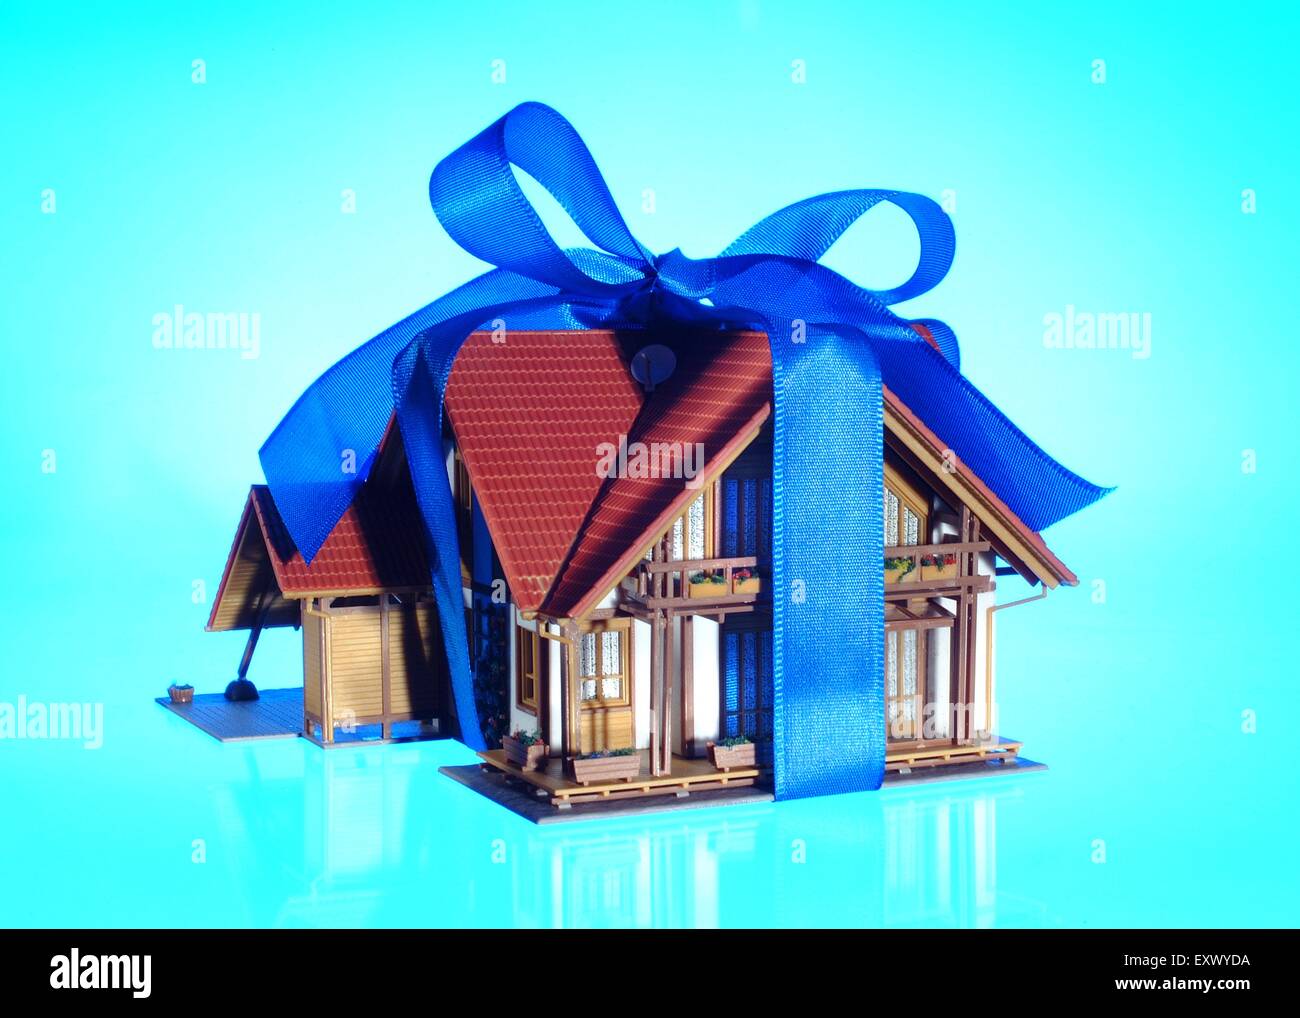 Model house as present with bow Stock Photo